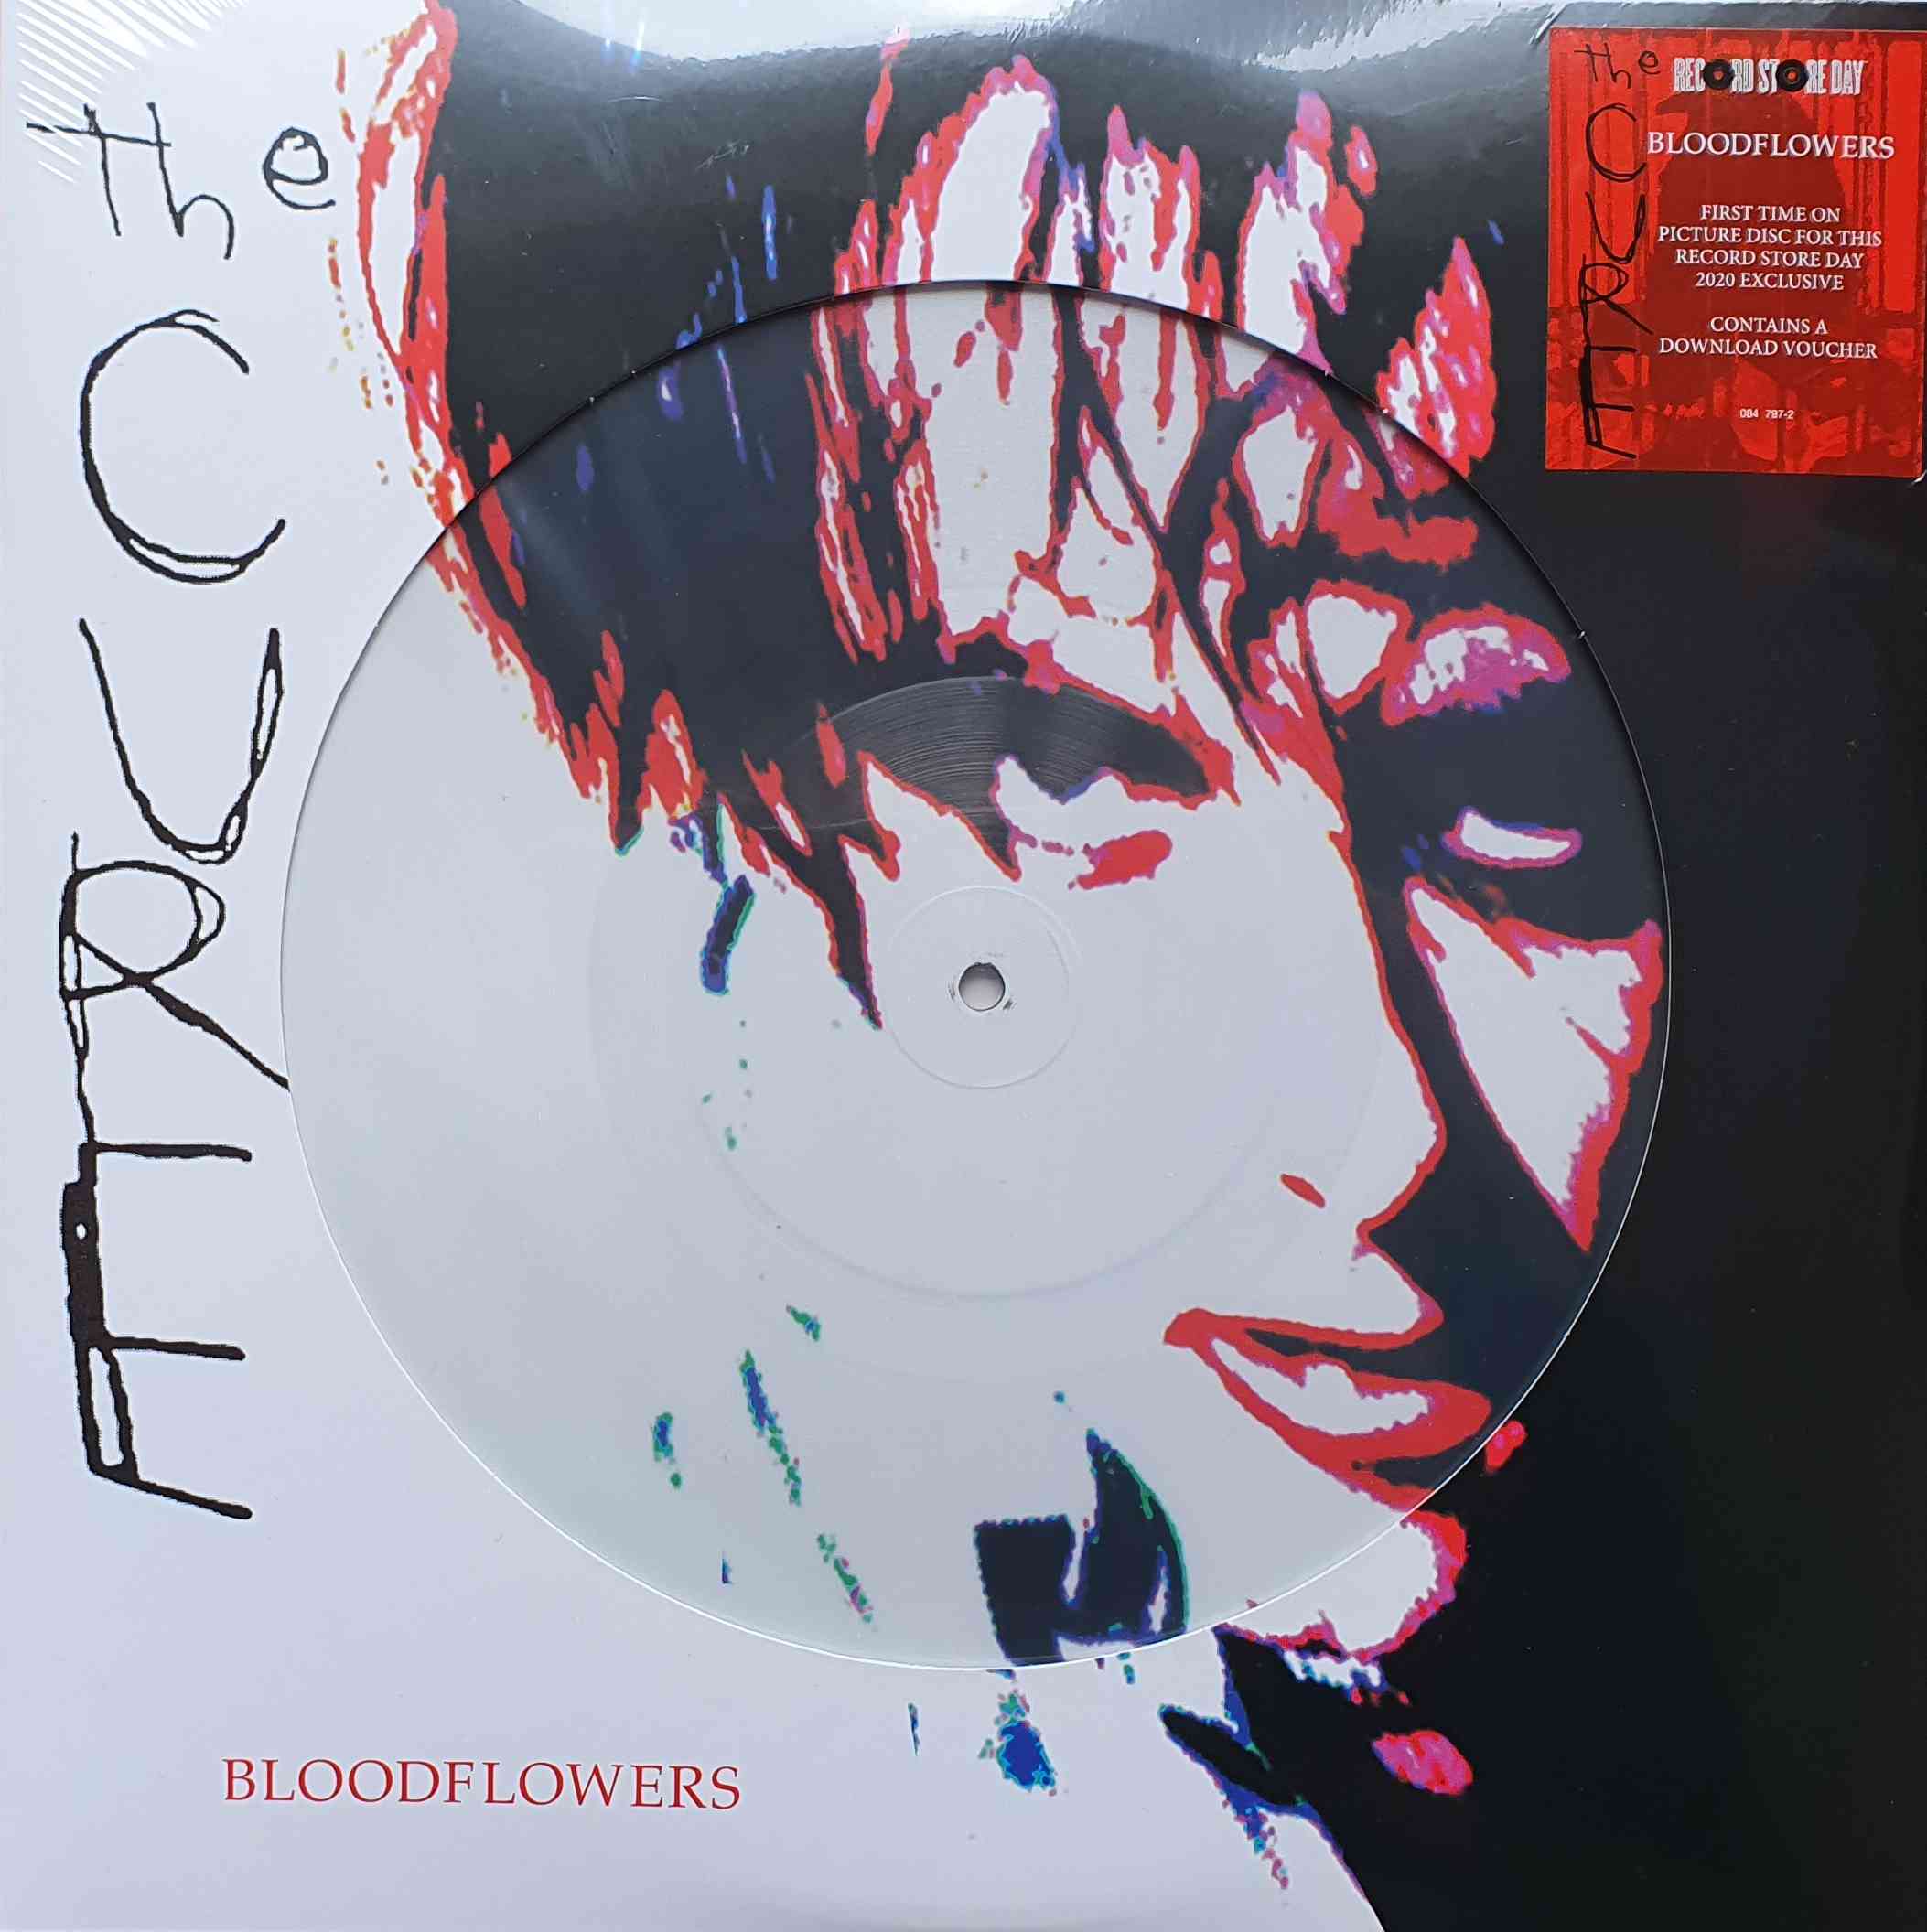 Picture of 084 797-2 Bloodflowers Limited edition picture disc - Record Store Day 2020 by artist The Cure from The Stranglers albums